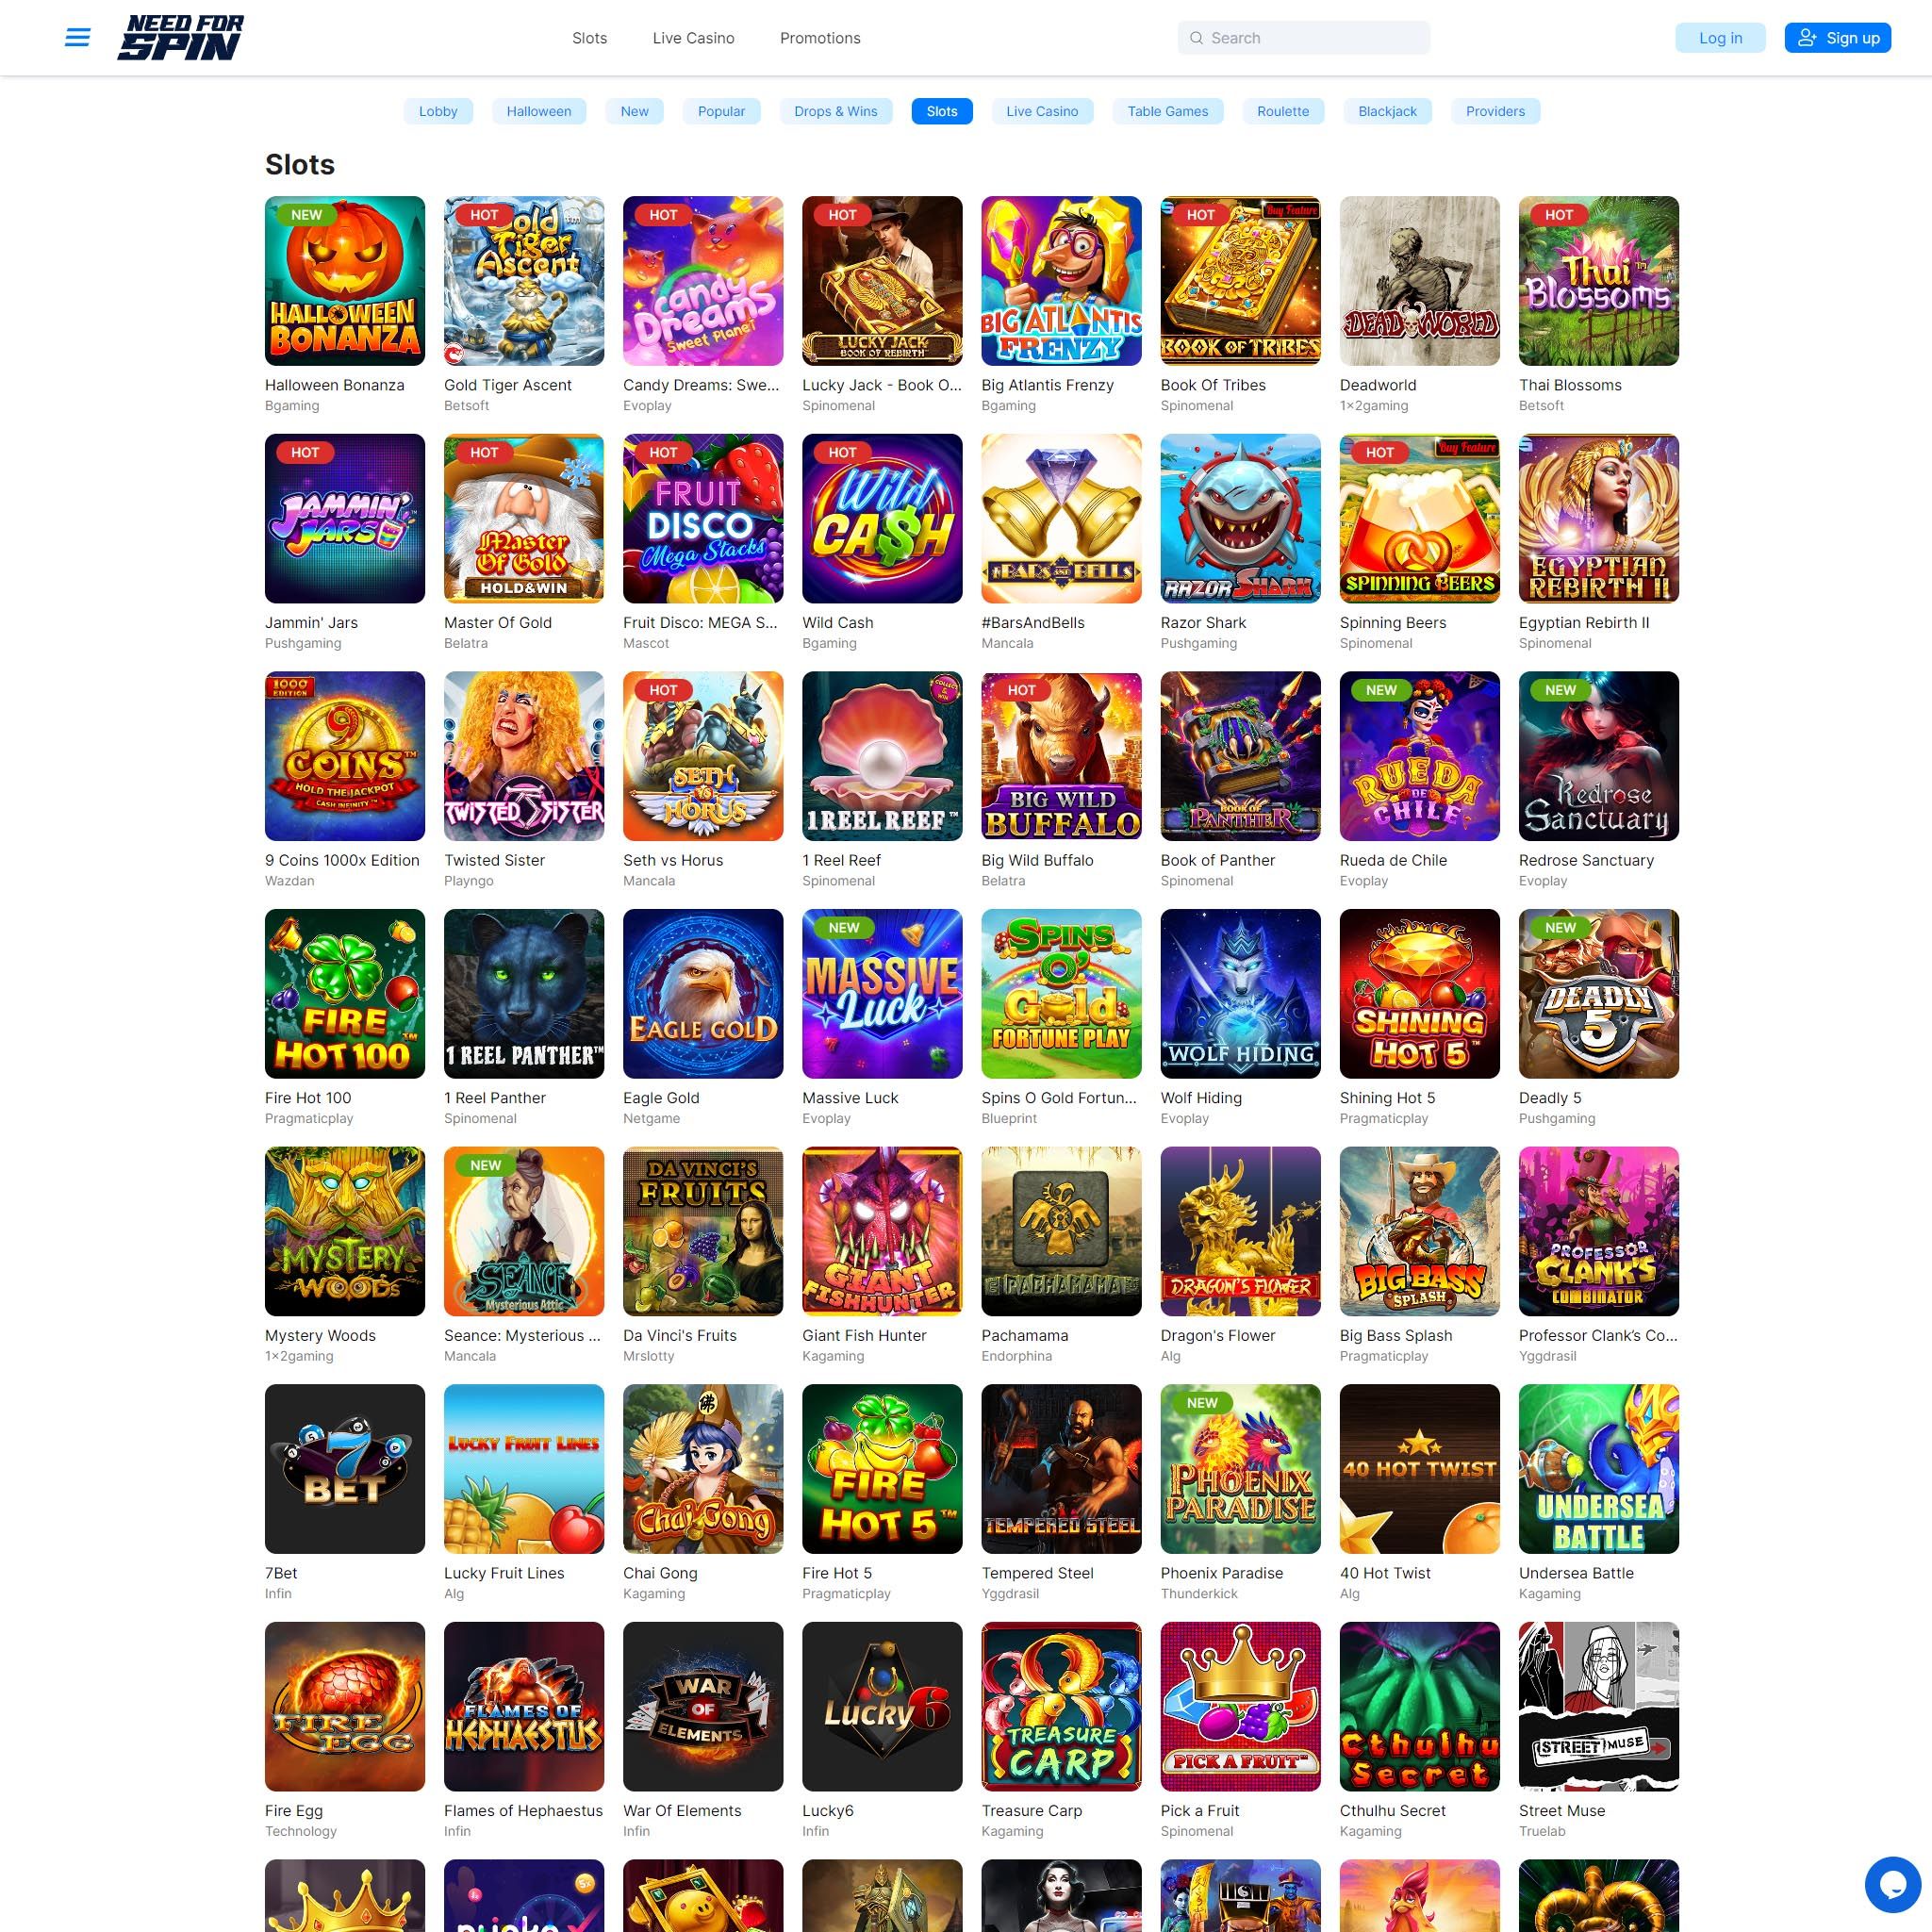 Need for Spin game catalogue